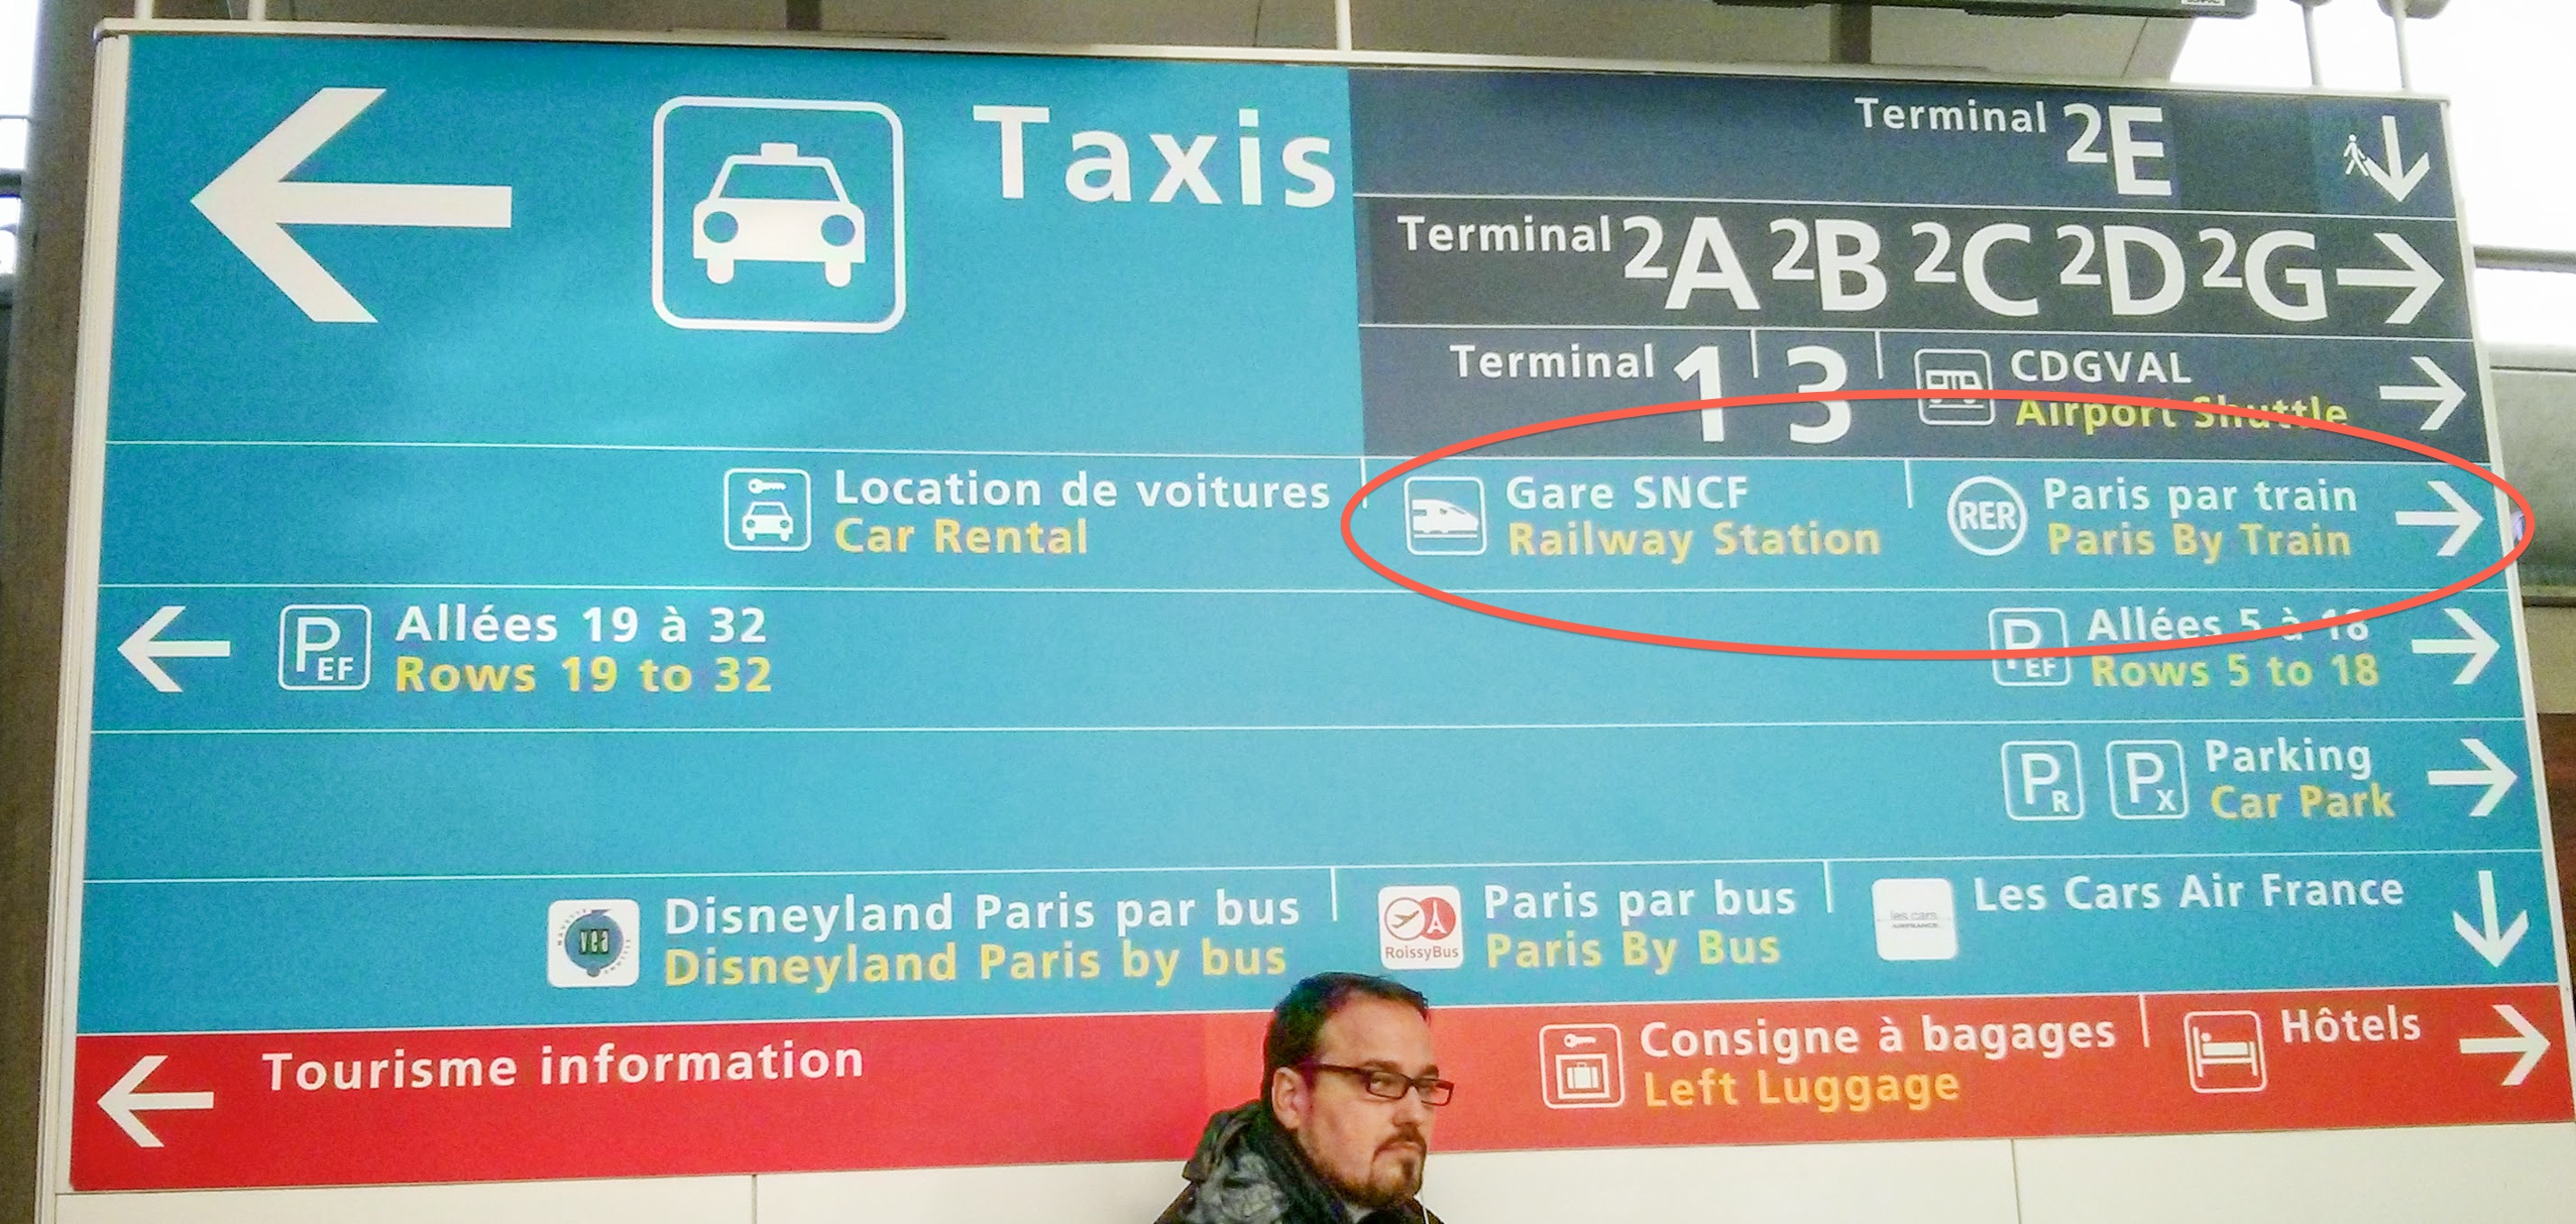 CDG Airport Terminal 2 Arrivals Area Sign